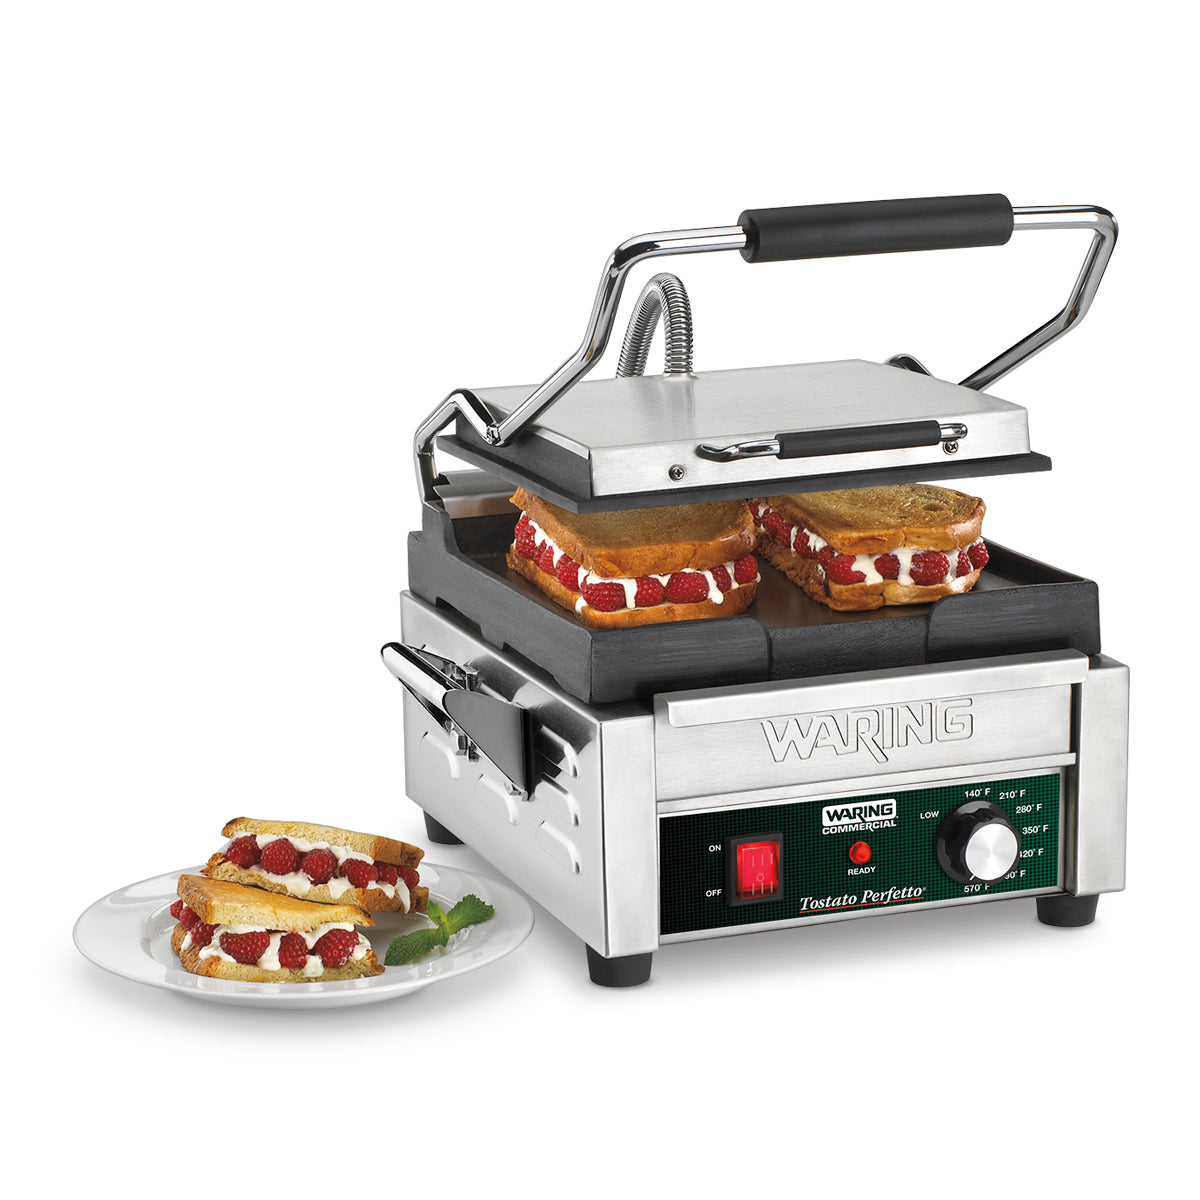 WFG150 Tostato Perfetto - Compact Italian-Style Flat Grill by Waring Commercial